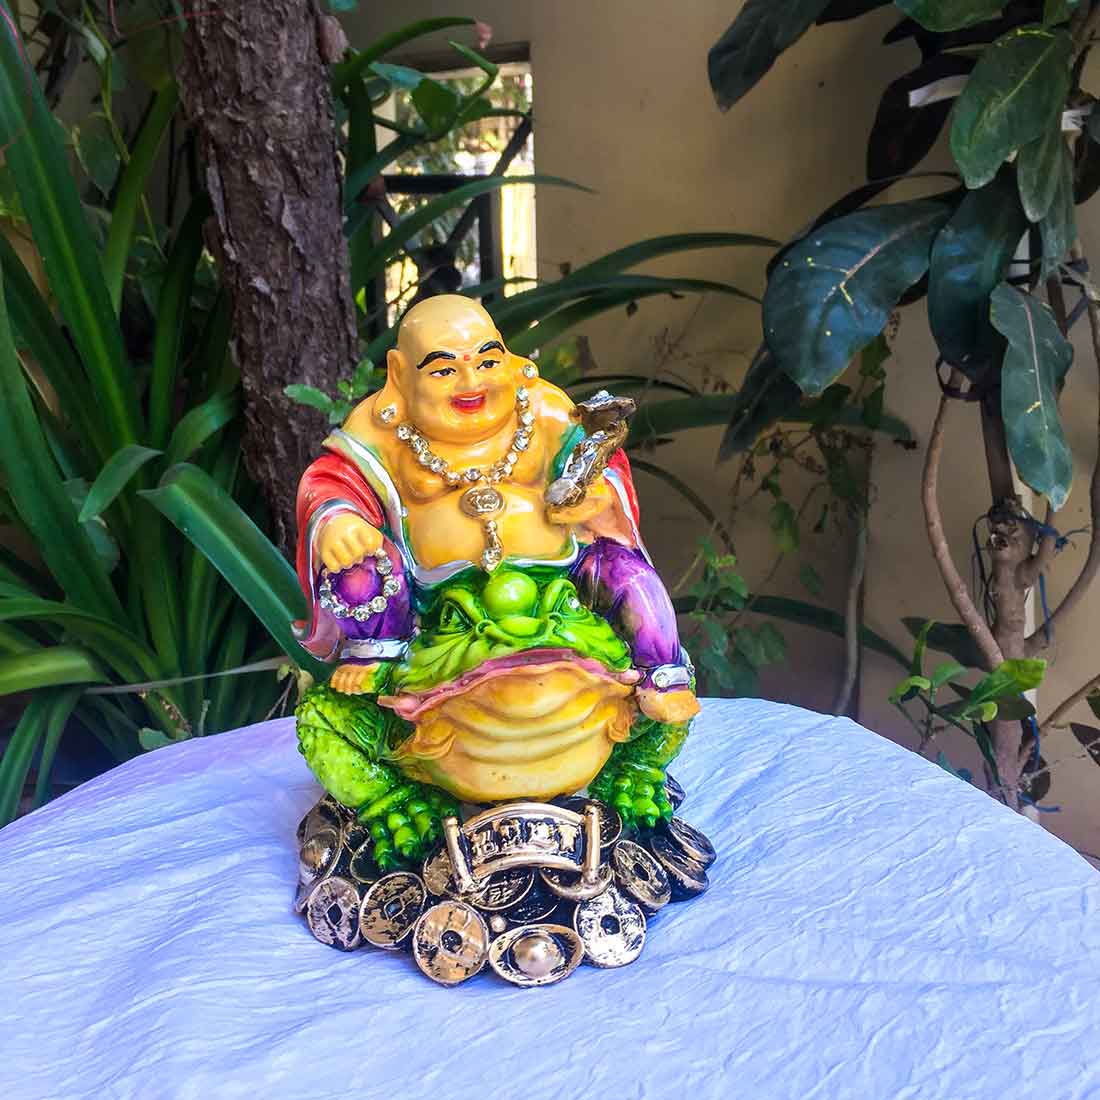 Laughing Buddha Showpiece | Laughing Buddha Statue - Sitting On Feng Shui Frog Design - for Good Luck, Money, Prosperity & Wealth - Apkamart #Size_8 Inch